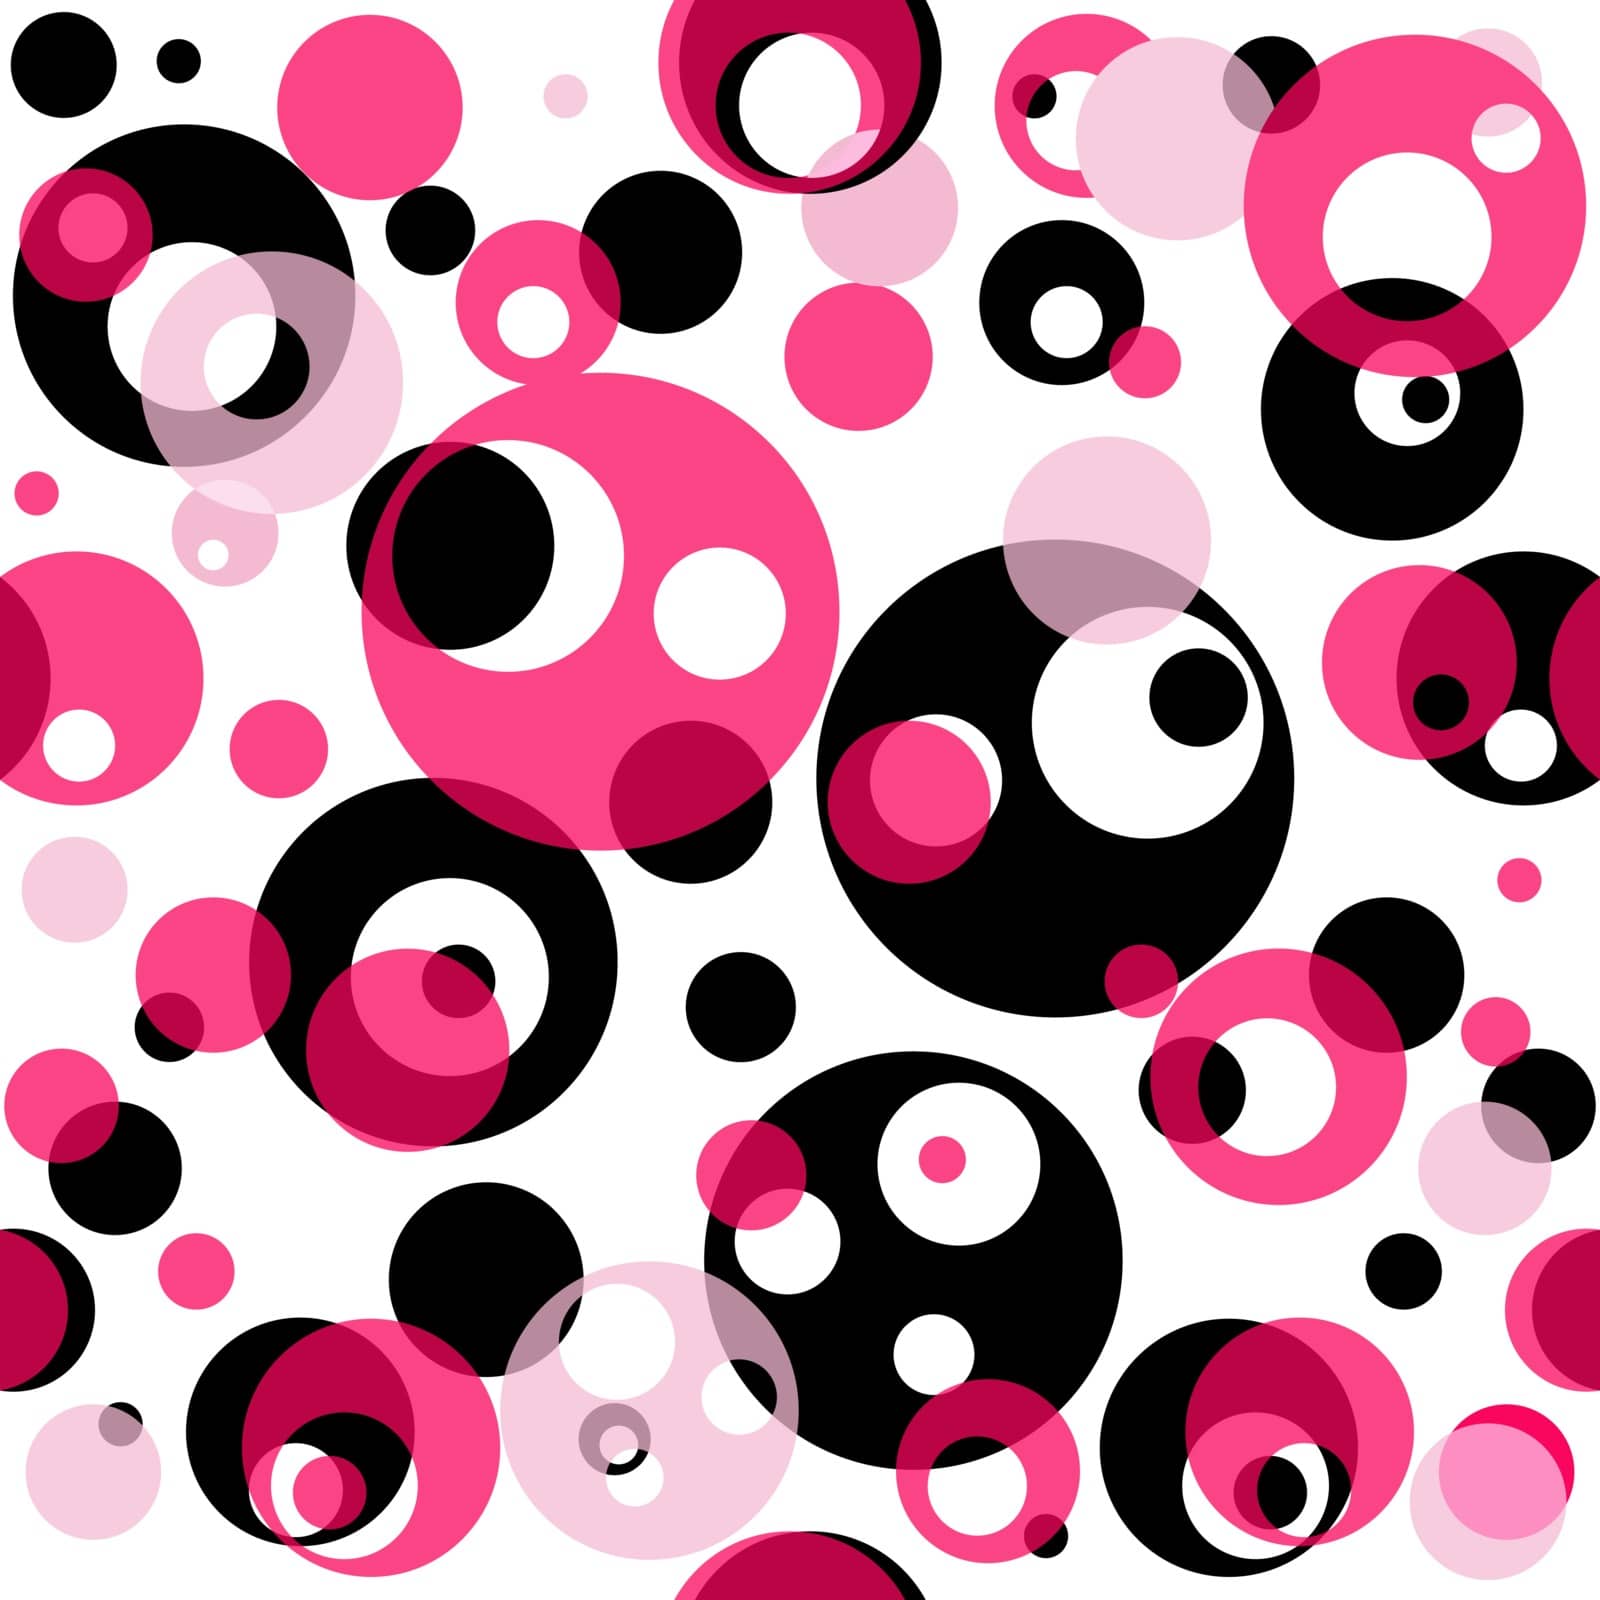 Abstract repeating pattern with translucent black and pink and white balls (vector EPS 10)